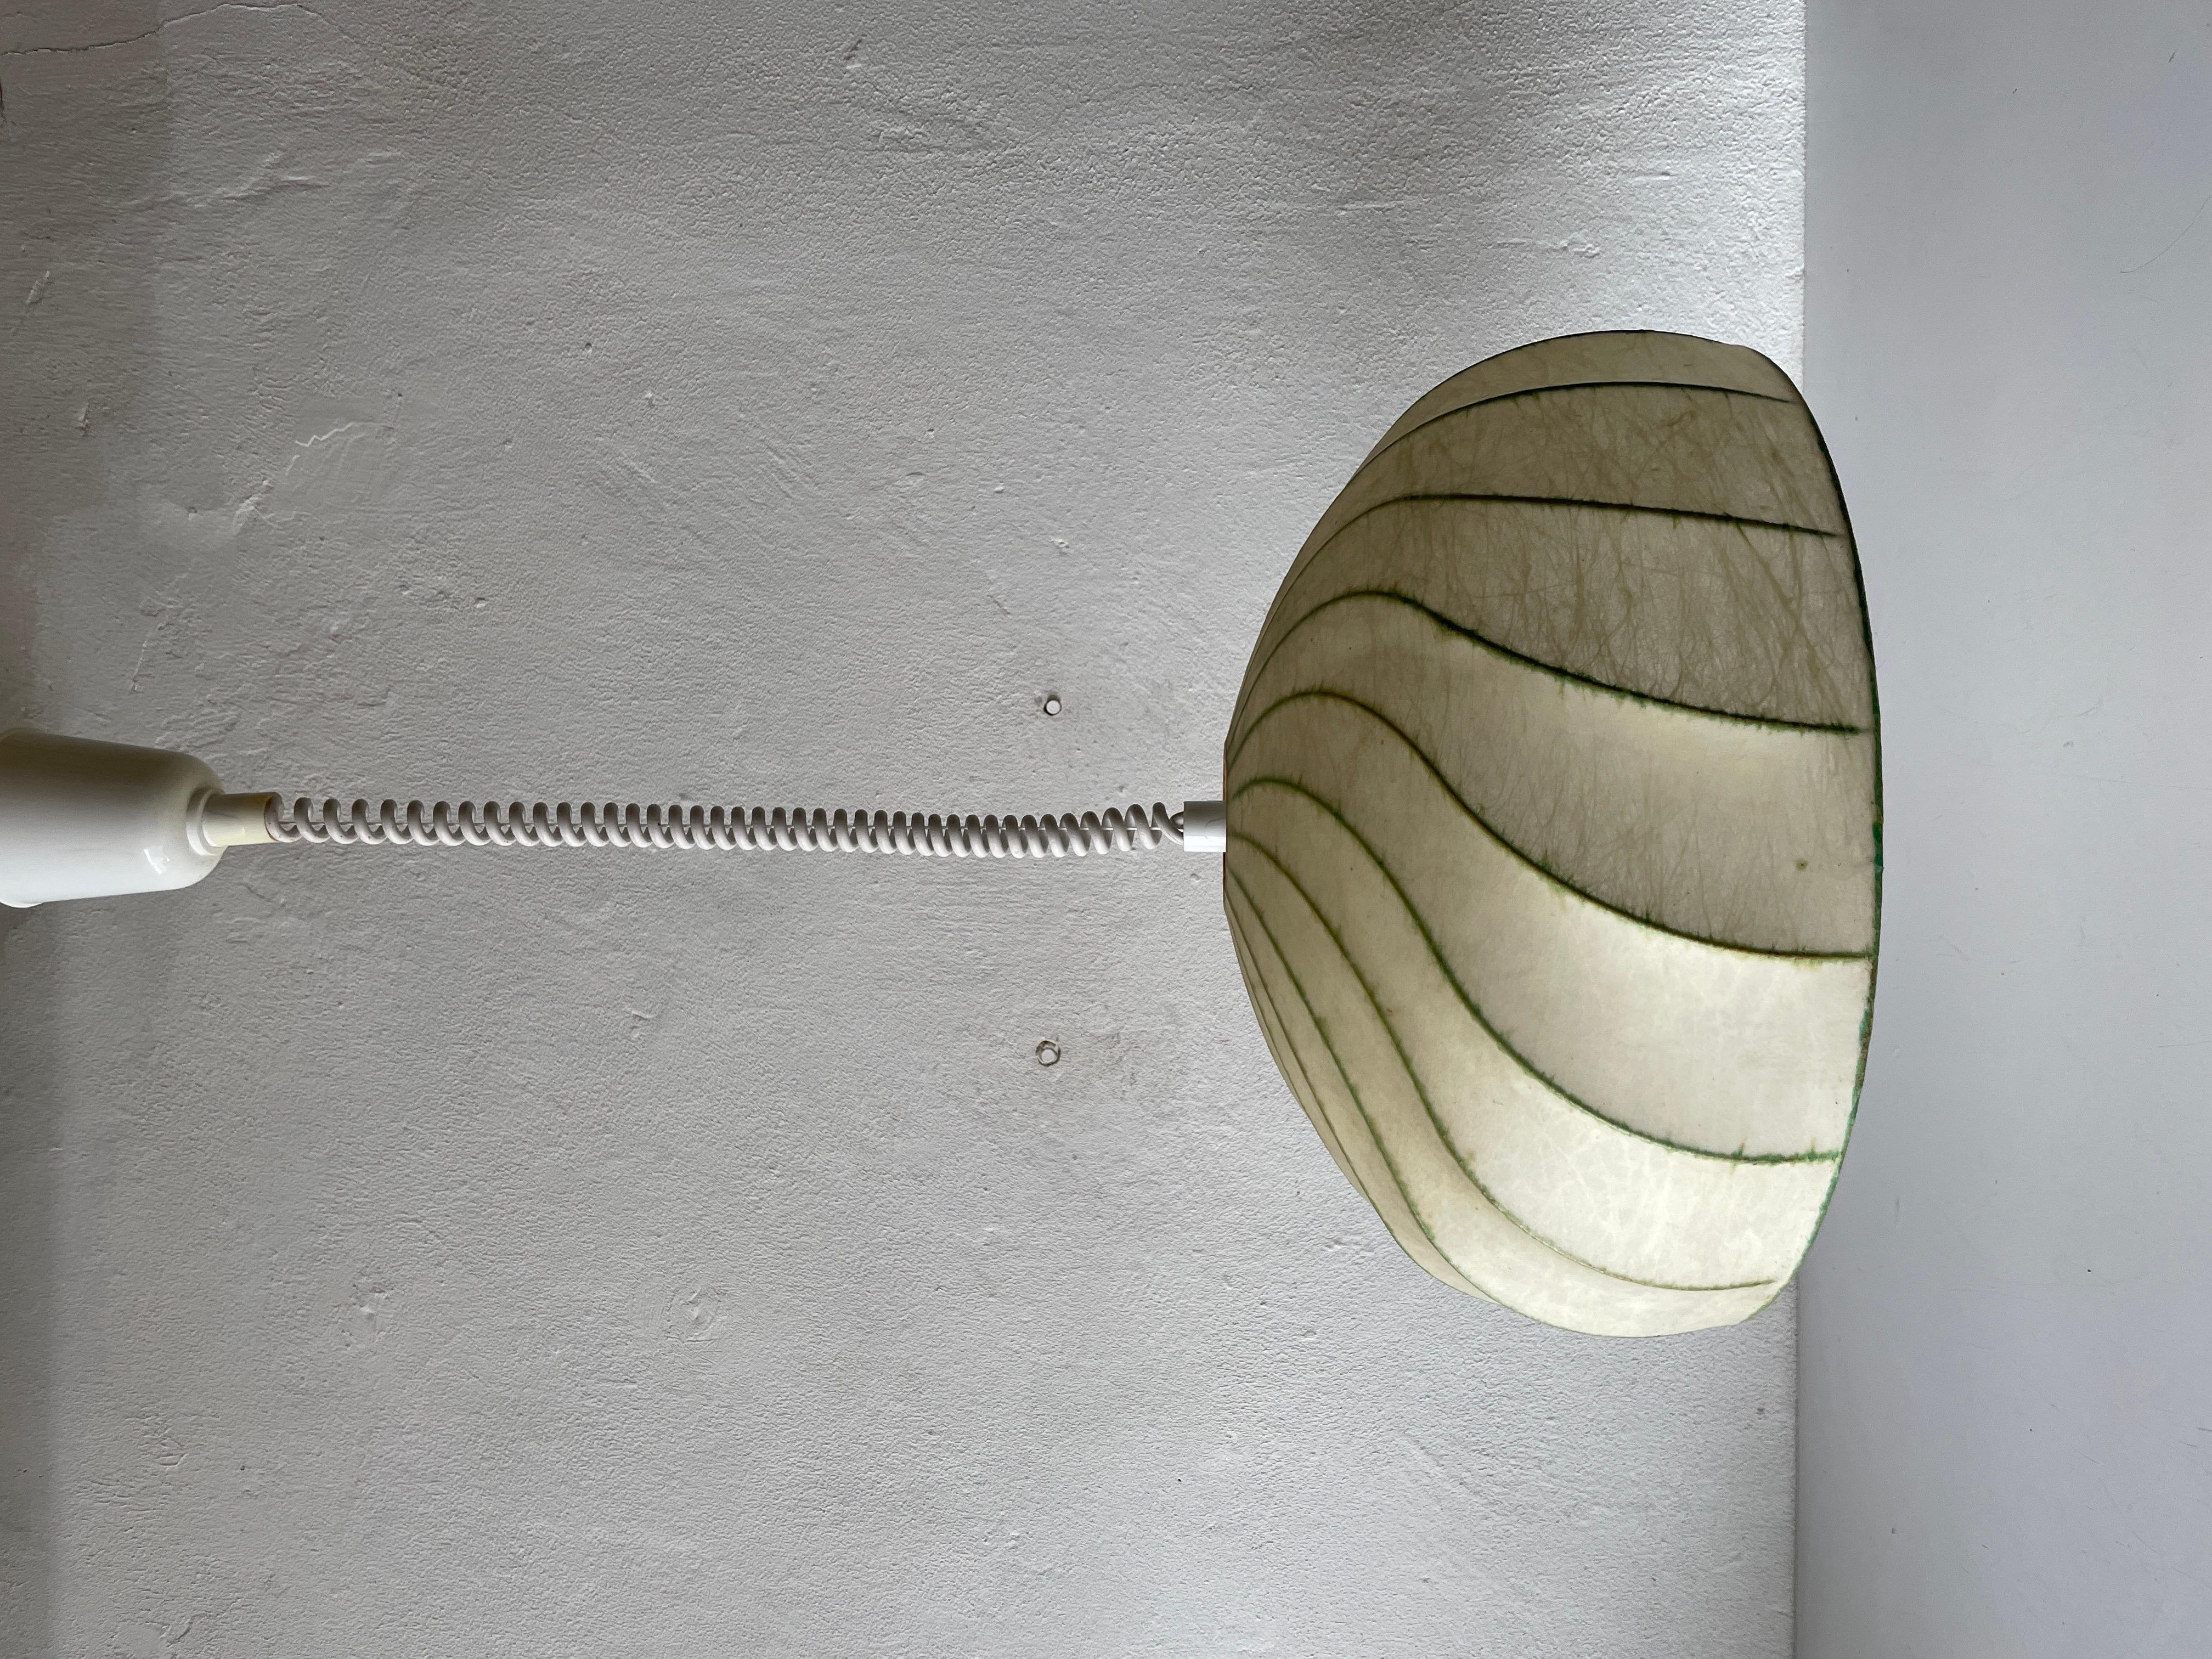 Cocoon Pendant Lamp by Goldkant, 1960s, Germany 1